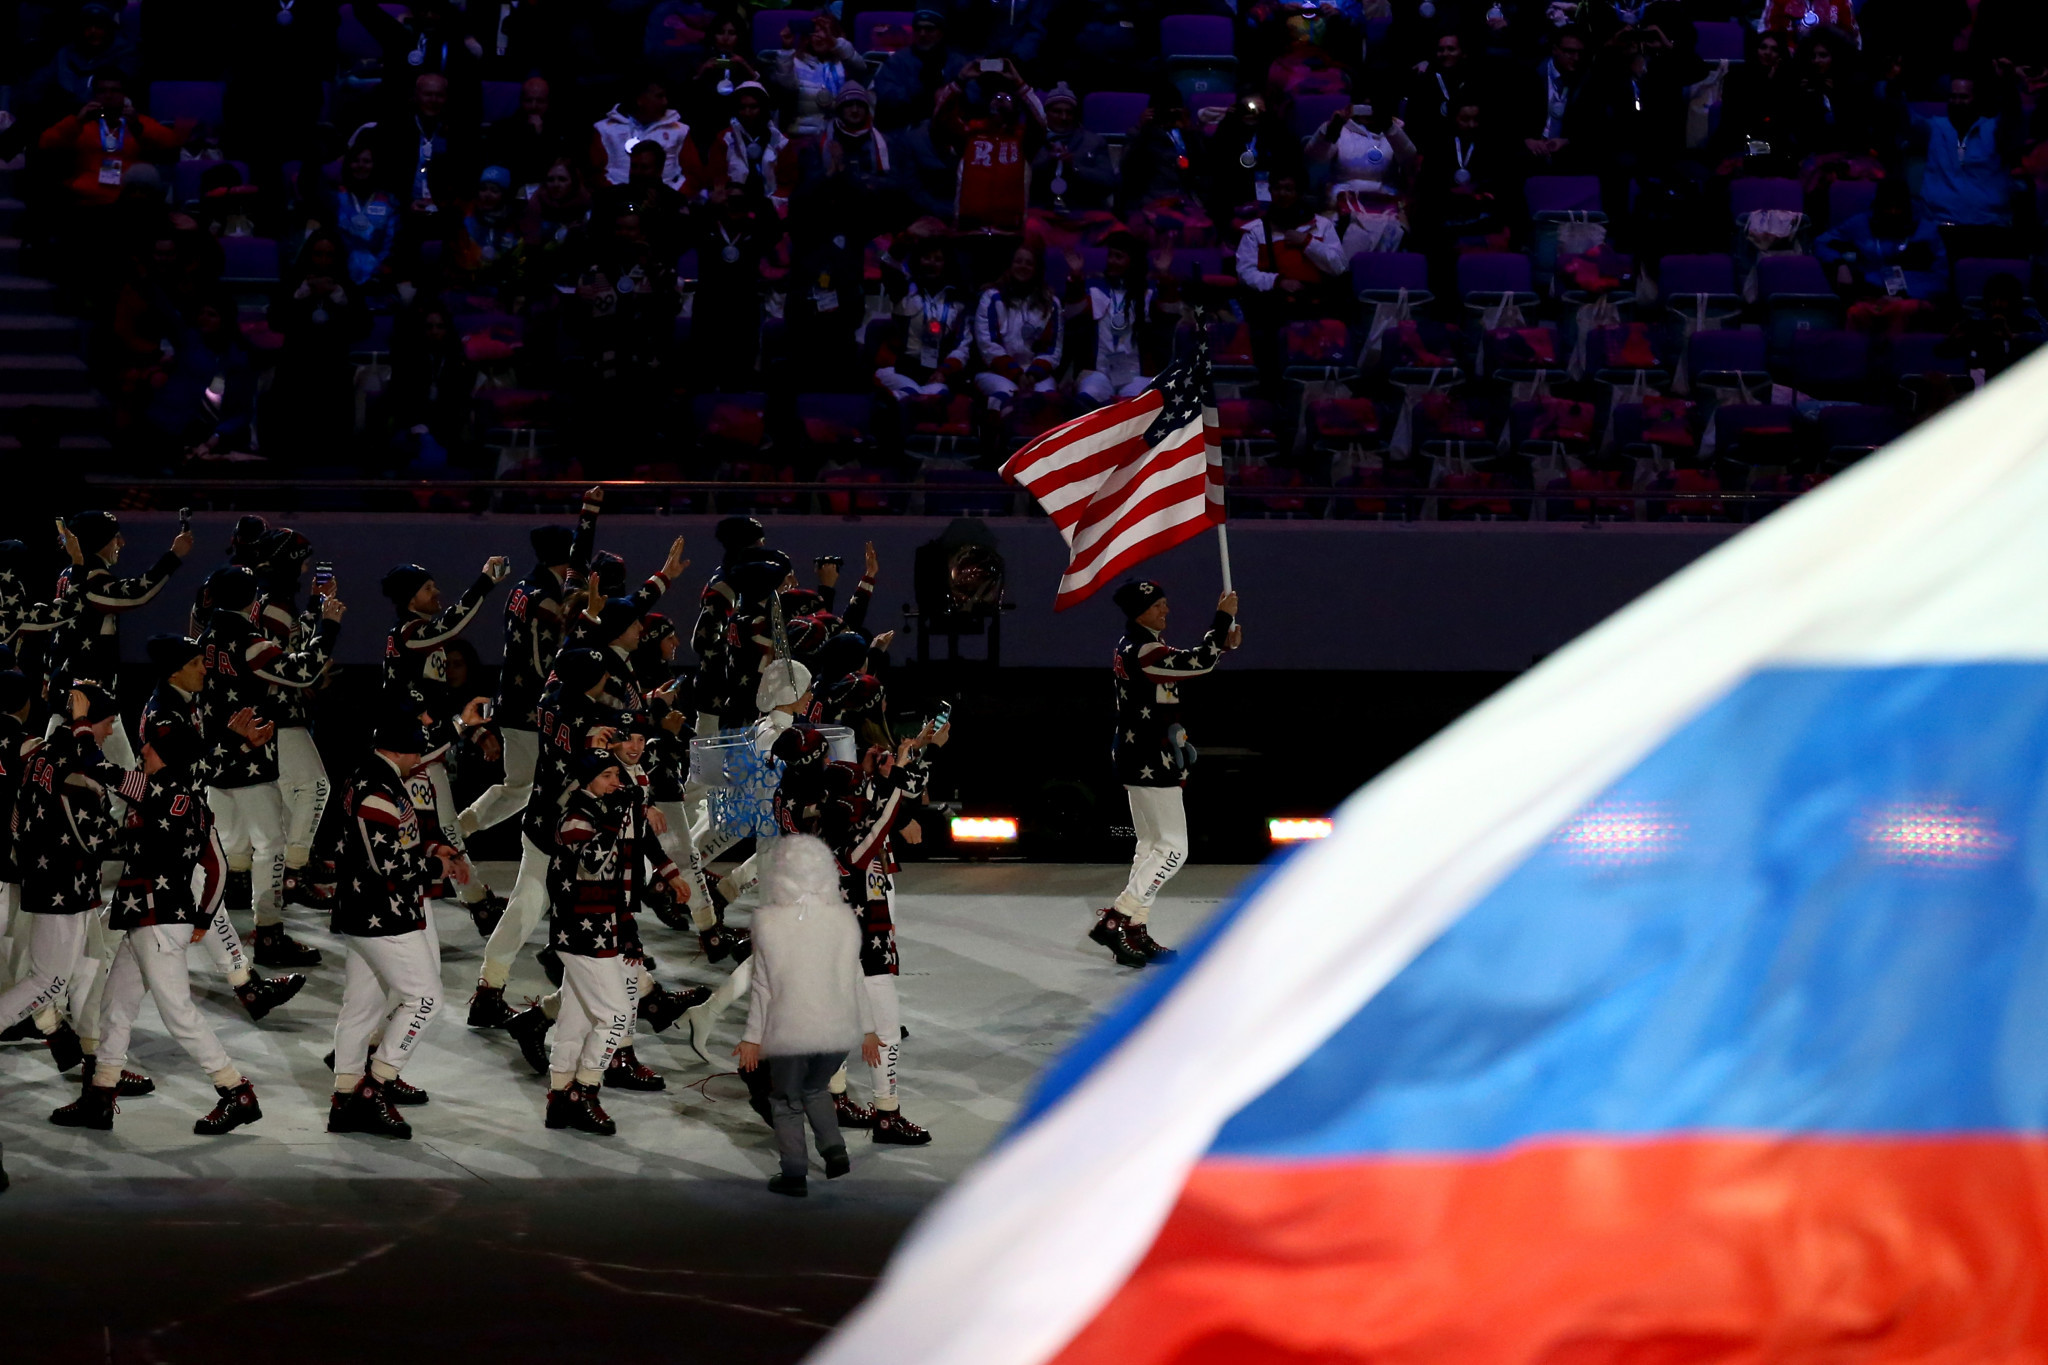 Russian Deputy Prime Minister claims IOC subject to "direct influence" from US State Department